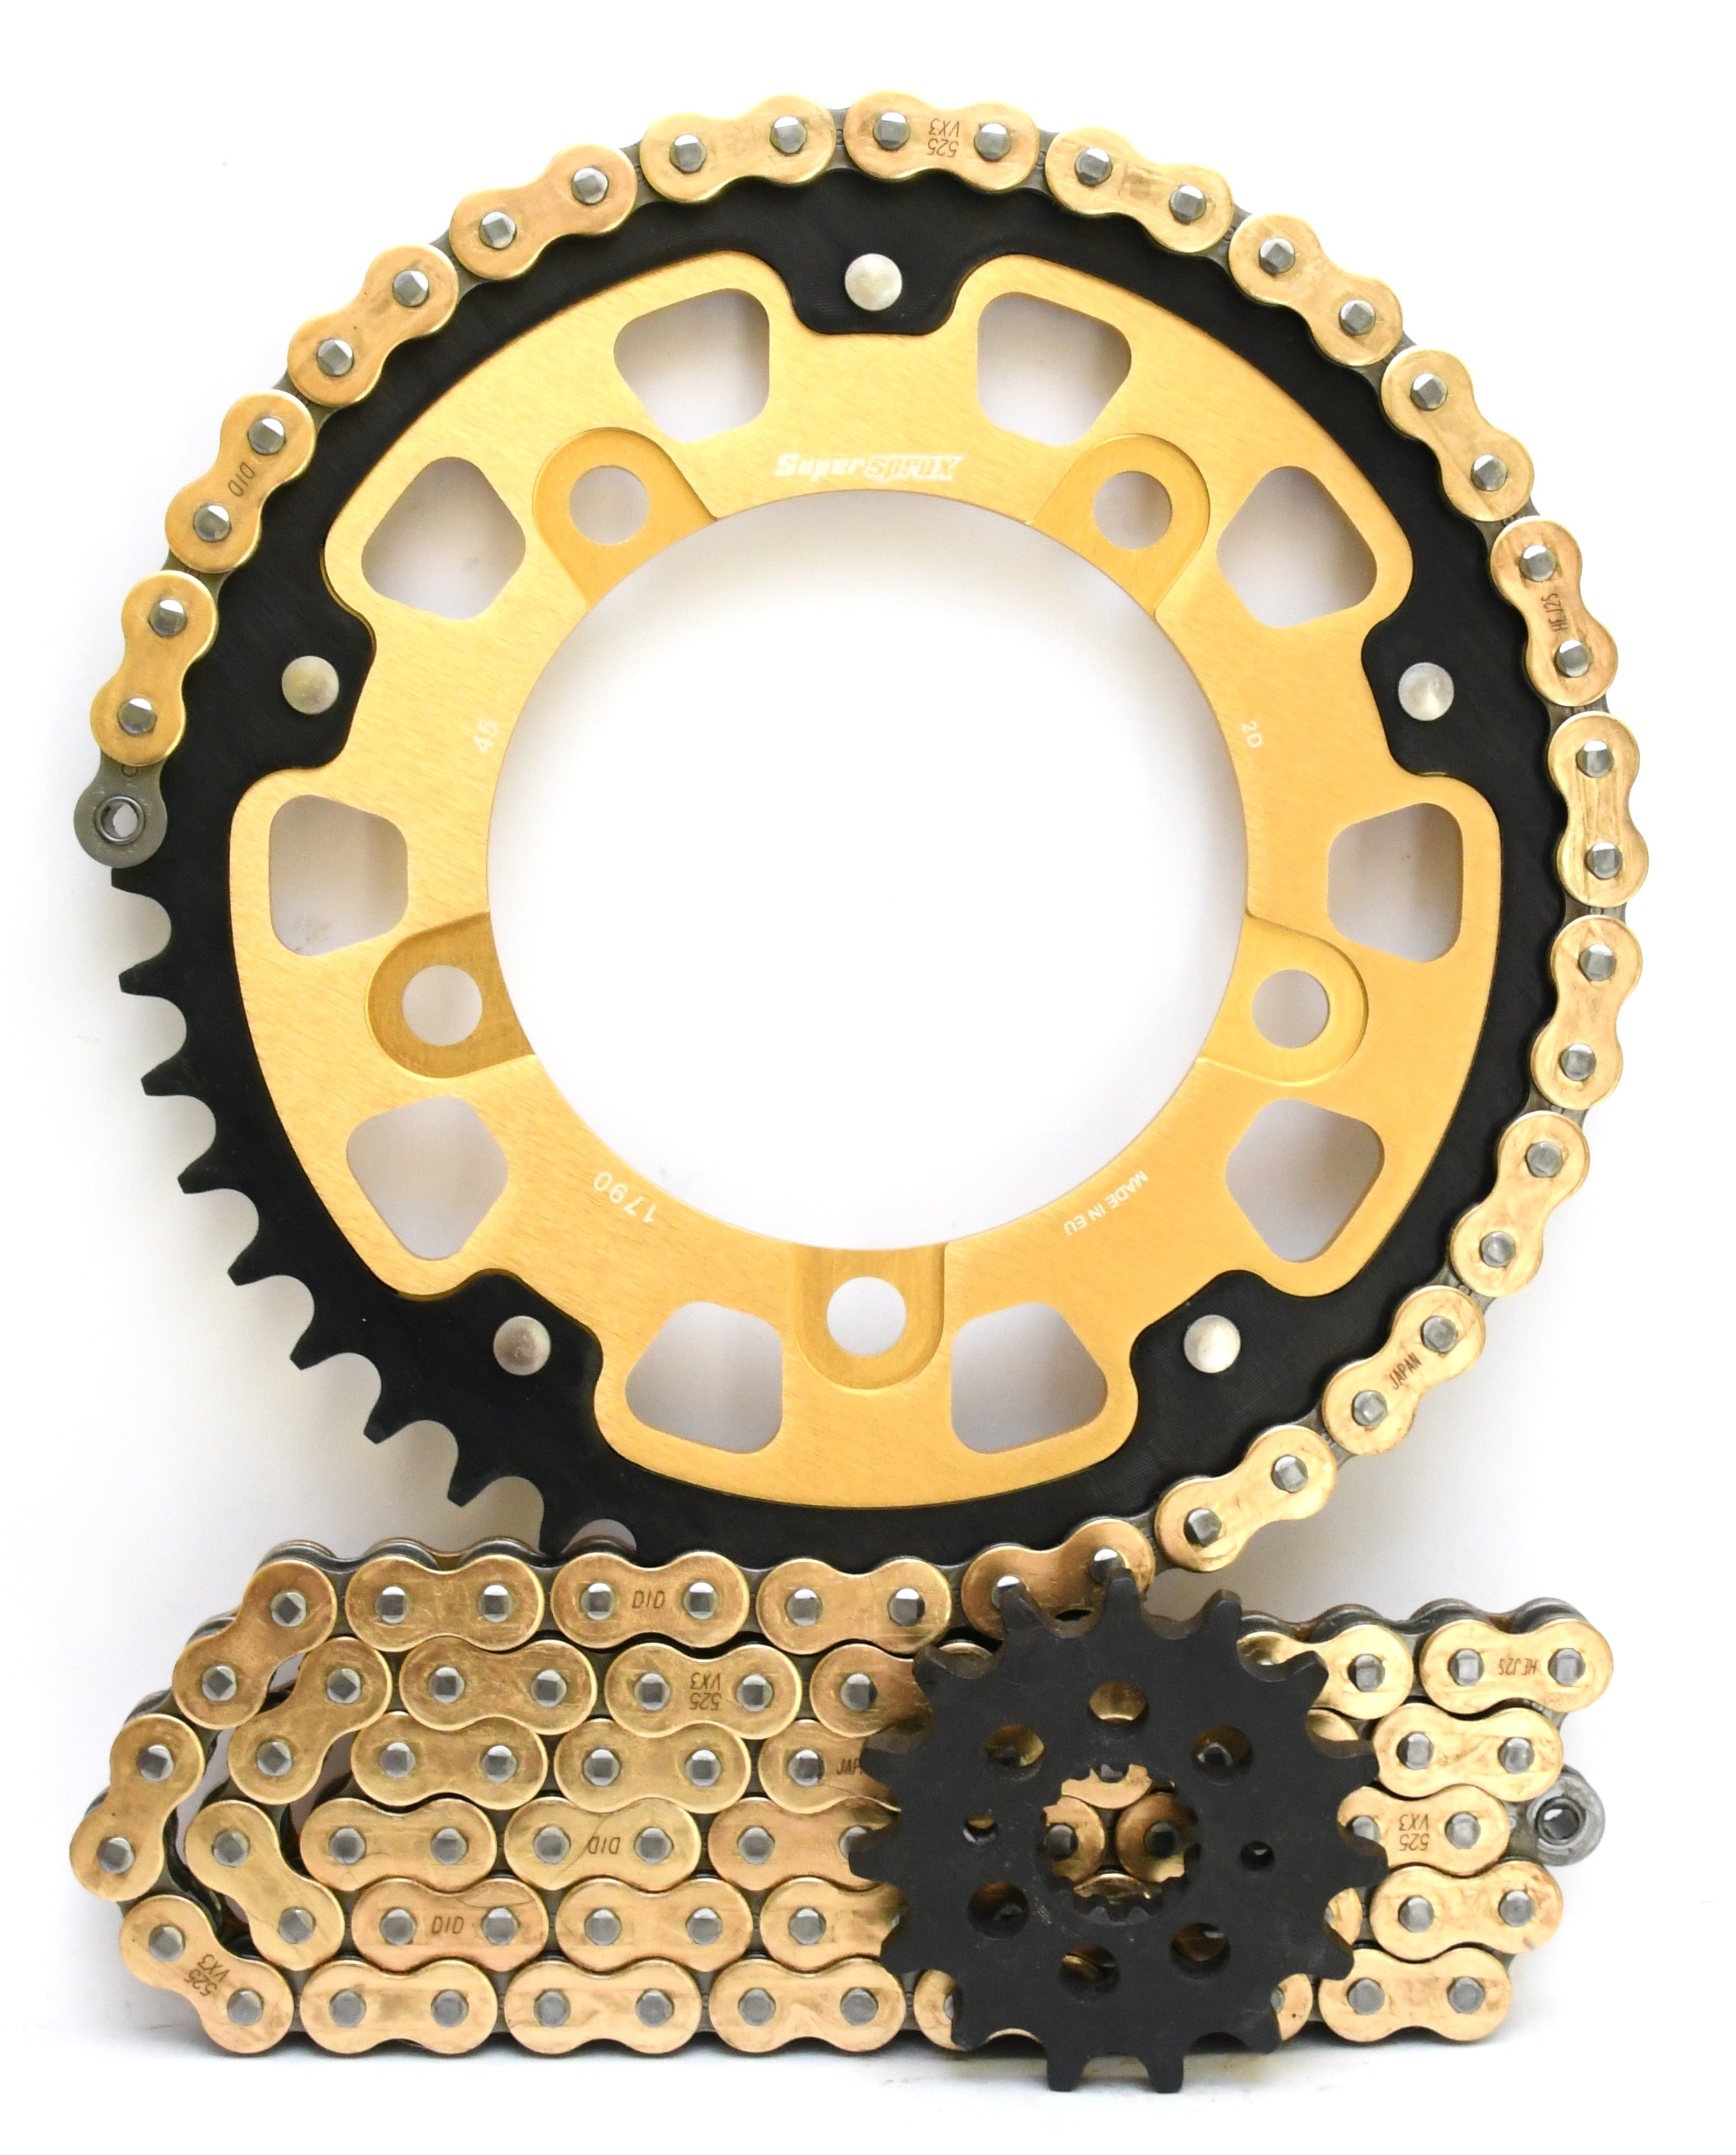 Supersprox Chain and Sprocket Kit - BMW S1000XR 2020> - Standard Gearing